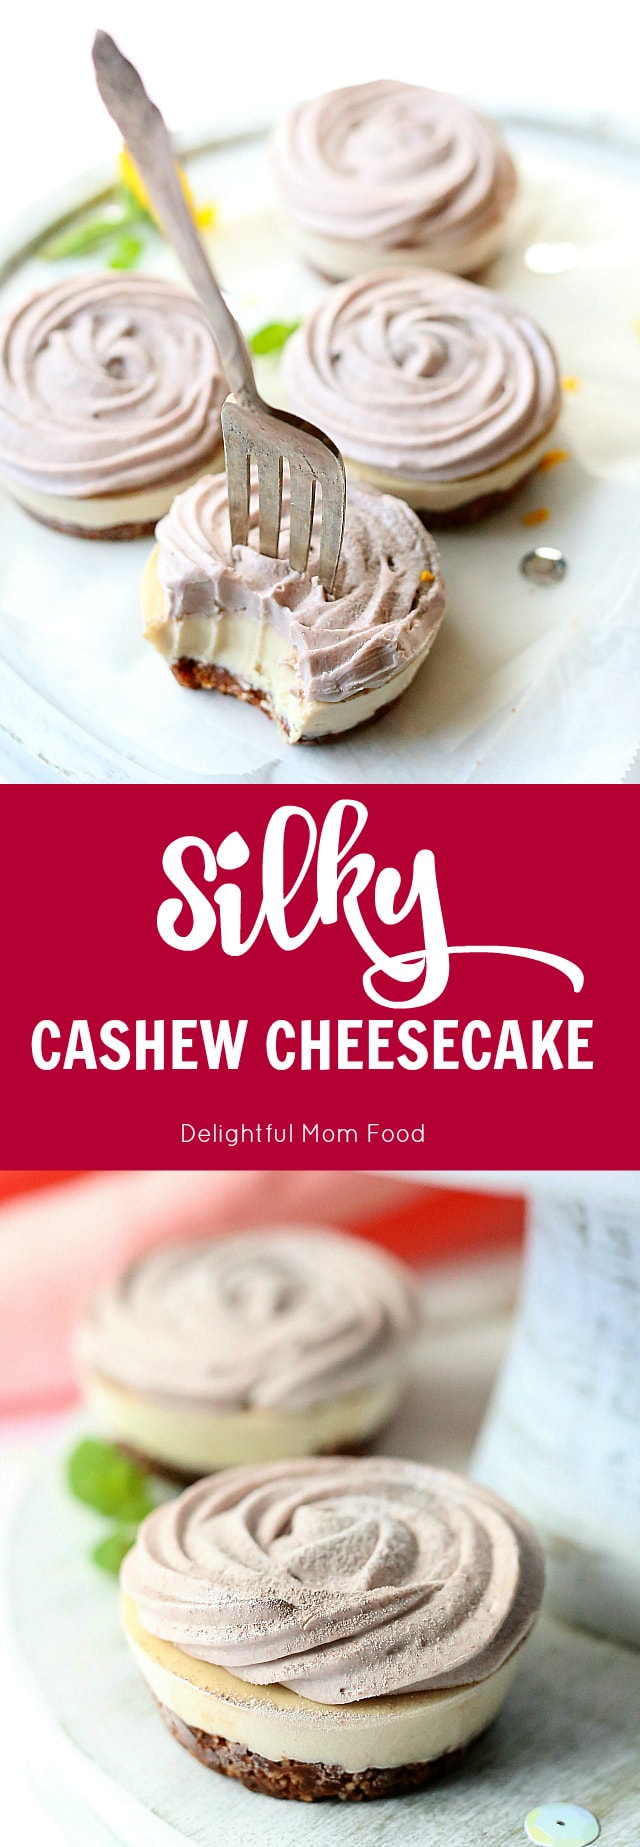 Vegan Cashew Cheesecake With Strawberry Rose Topping | Delightful Mom Food